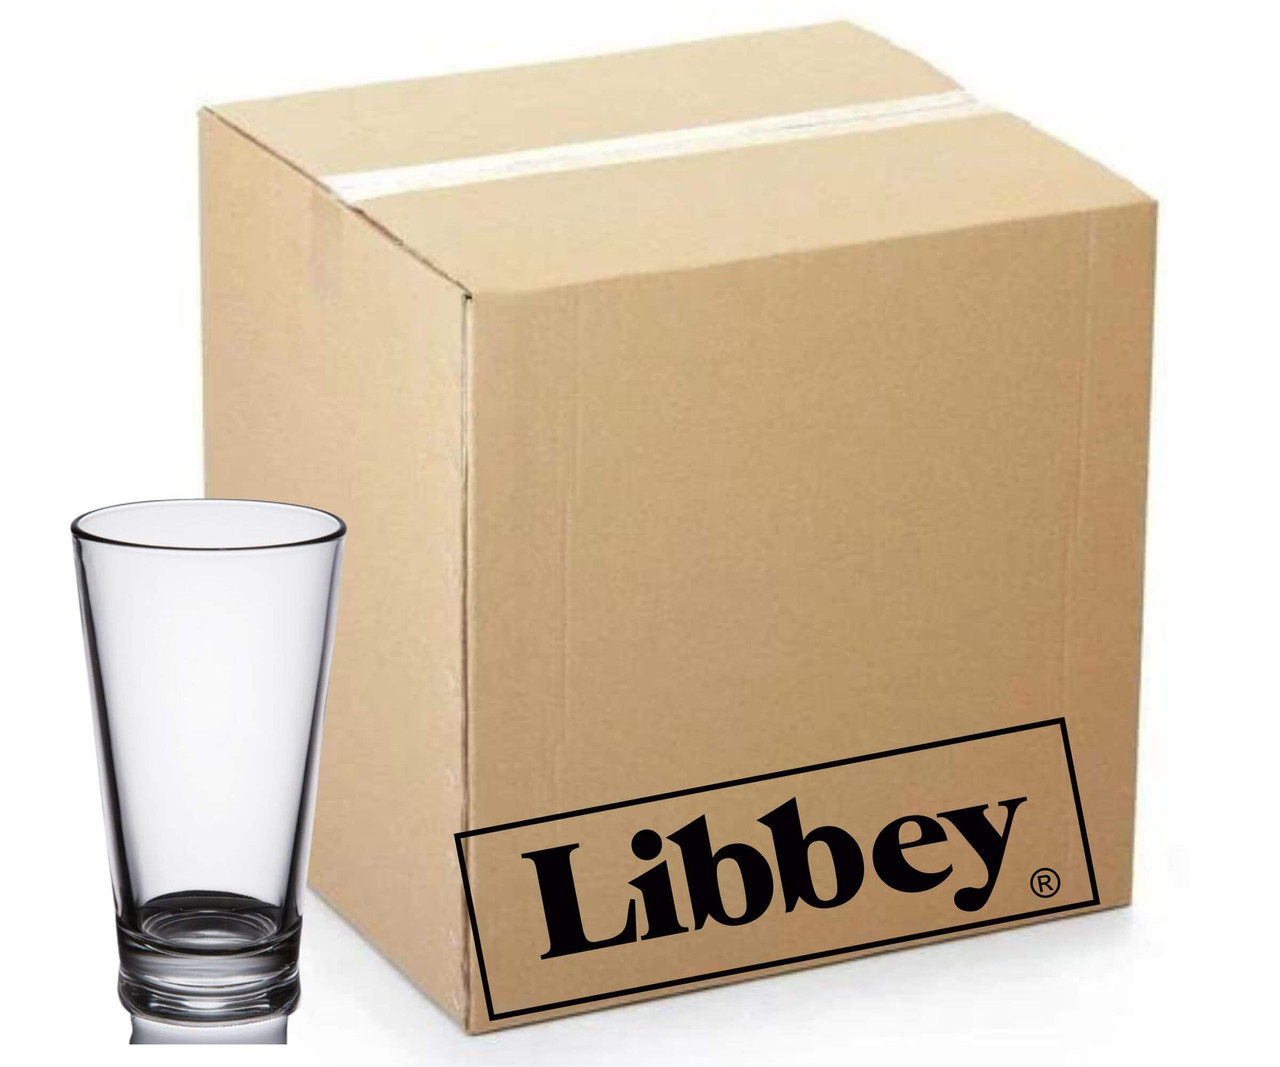 Libbey Restaurant Basics Case - 24-Pack Rim Tempered Mixing Glasses, 16 oz.-Chicken Pieces